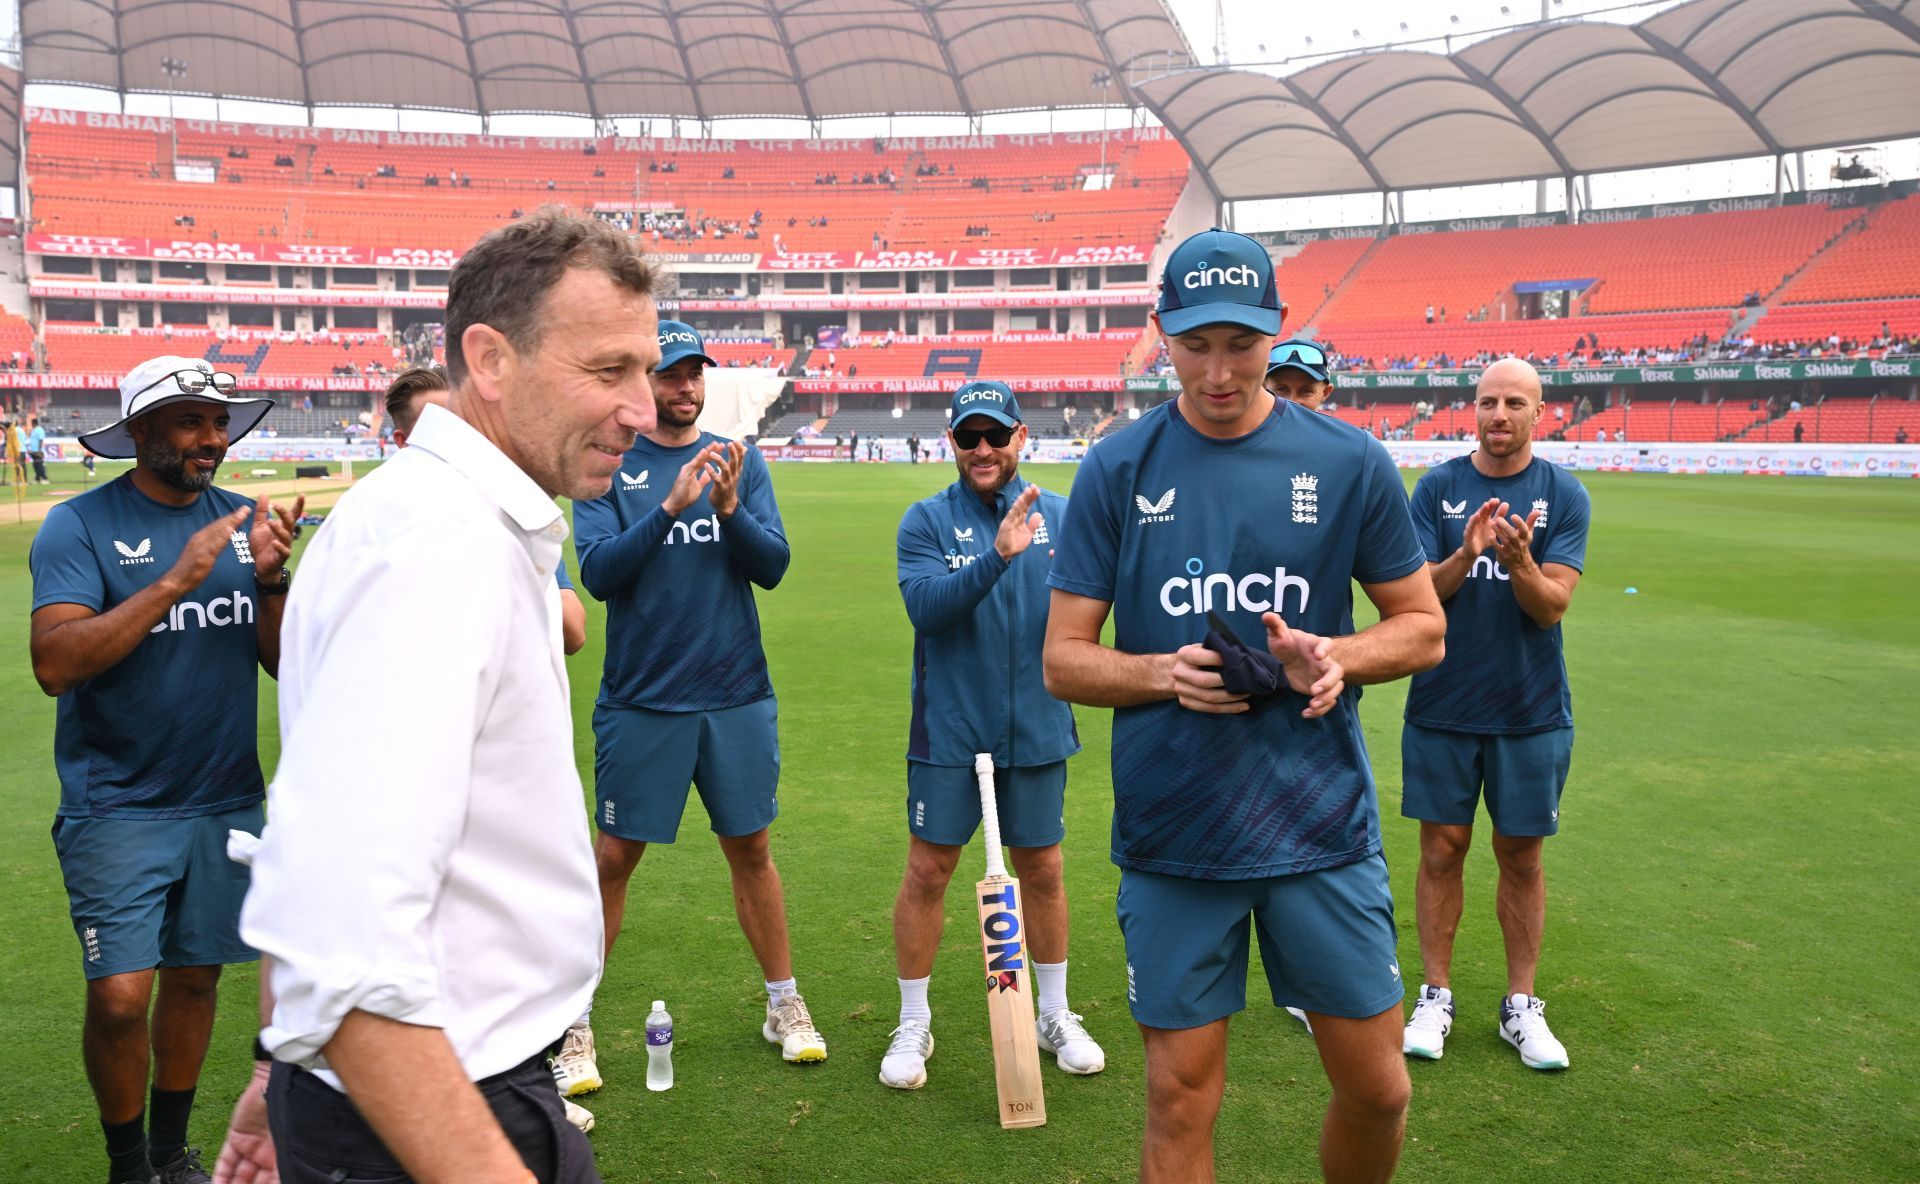 Tom Hatley receives his Test cap from former England captain Michael Atherton